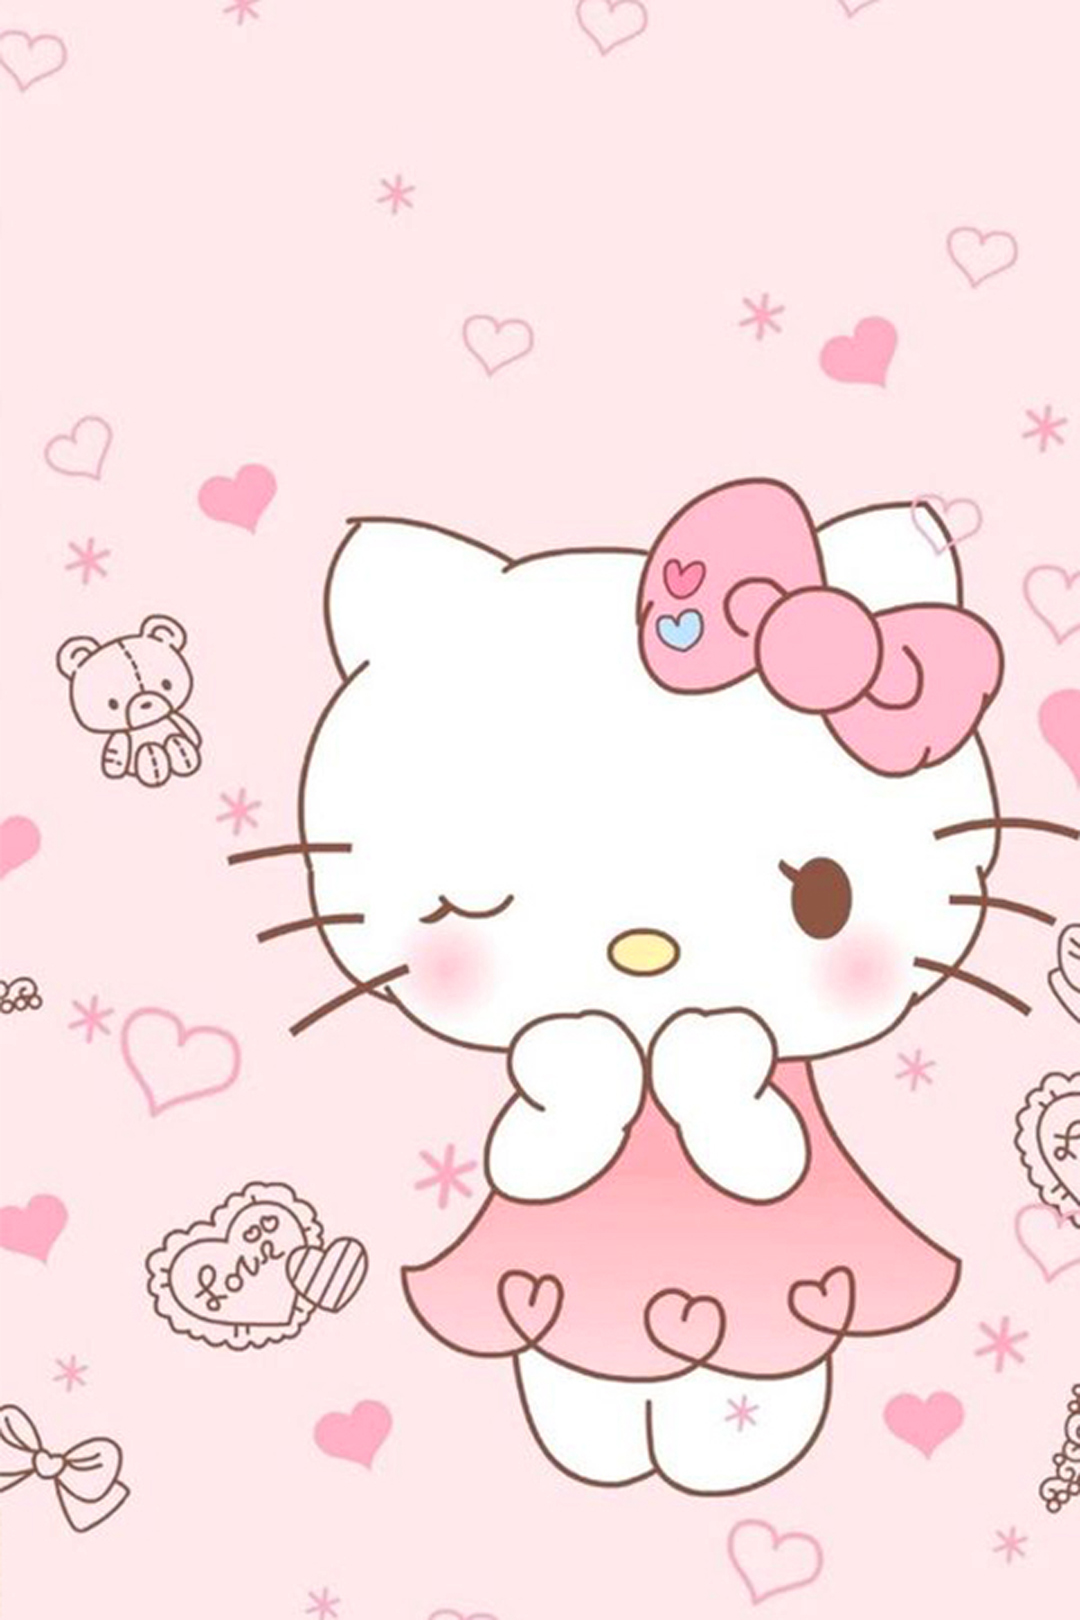 HELLO KITTY | Hello kitty backgrounds, Hello kitty printables, Hello kitty  images